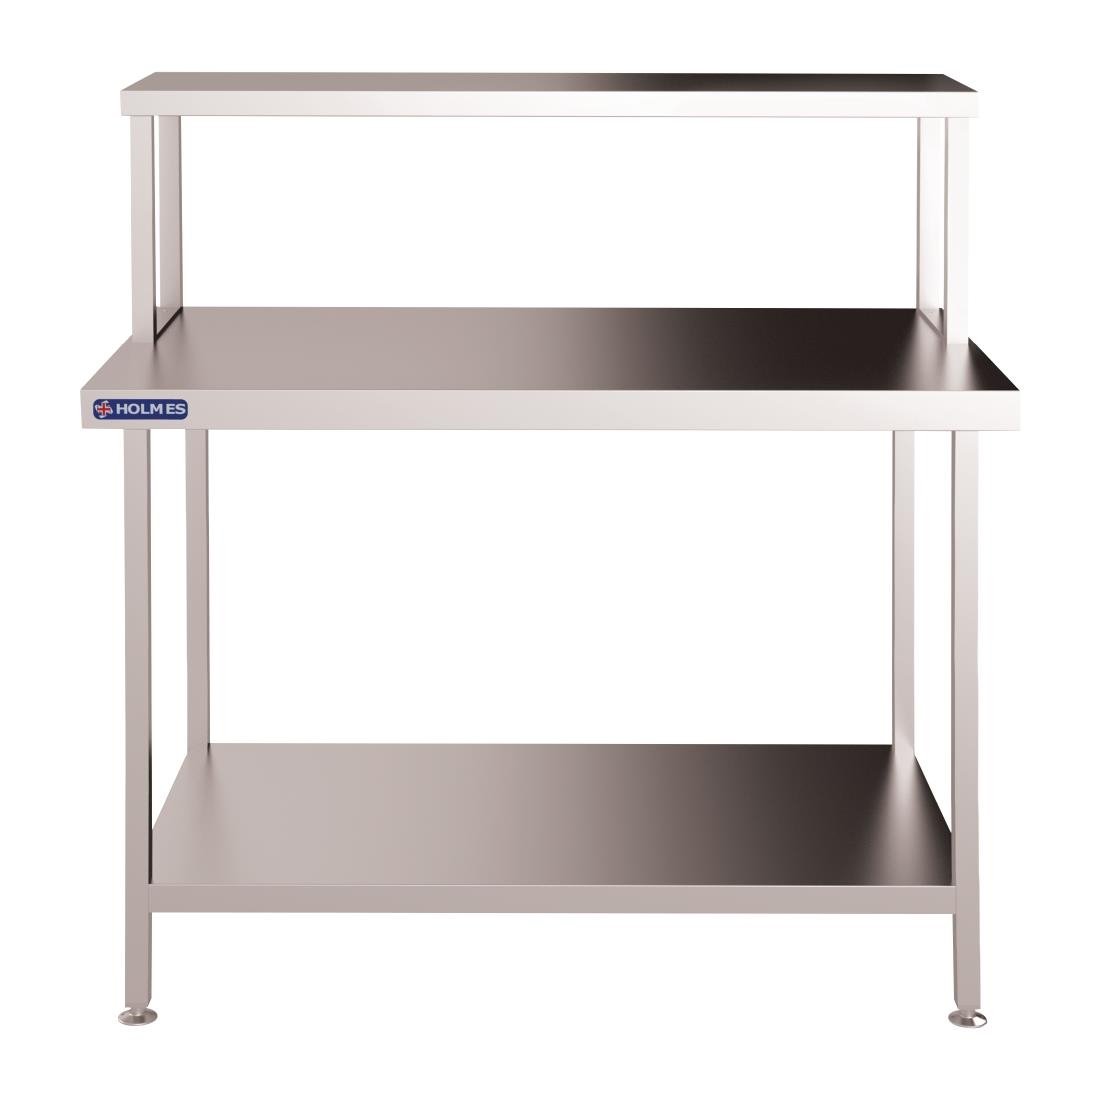 FC445 Holmes Stainless Steel Wall Prep Table Welded with Gantry 1200mm JD Catering Equipment Solutions Ltd